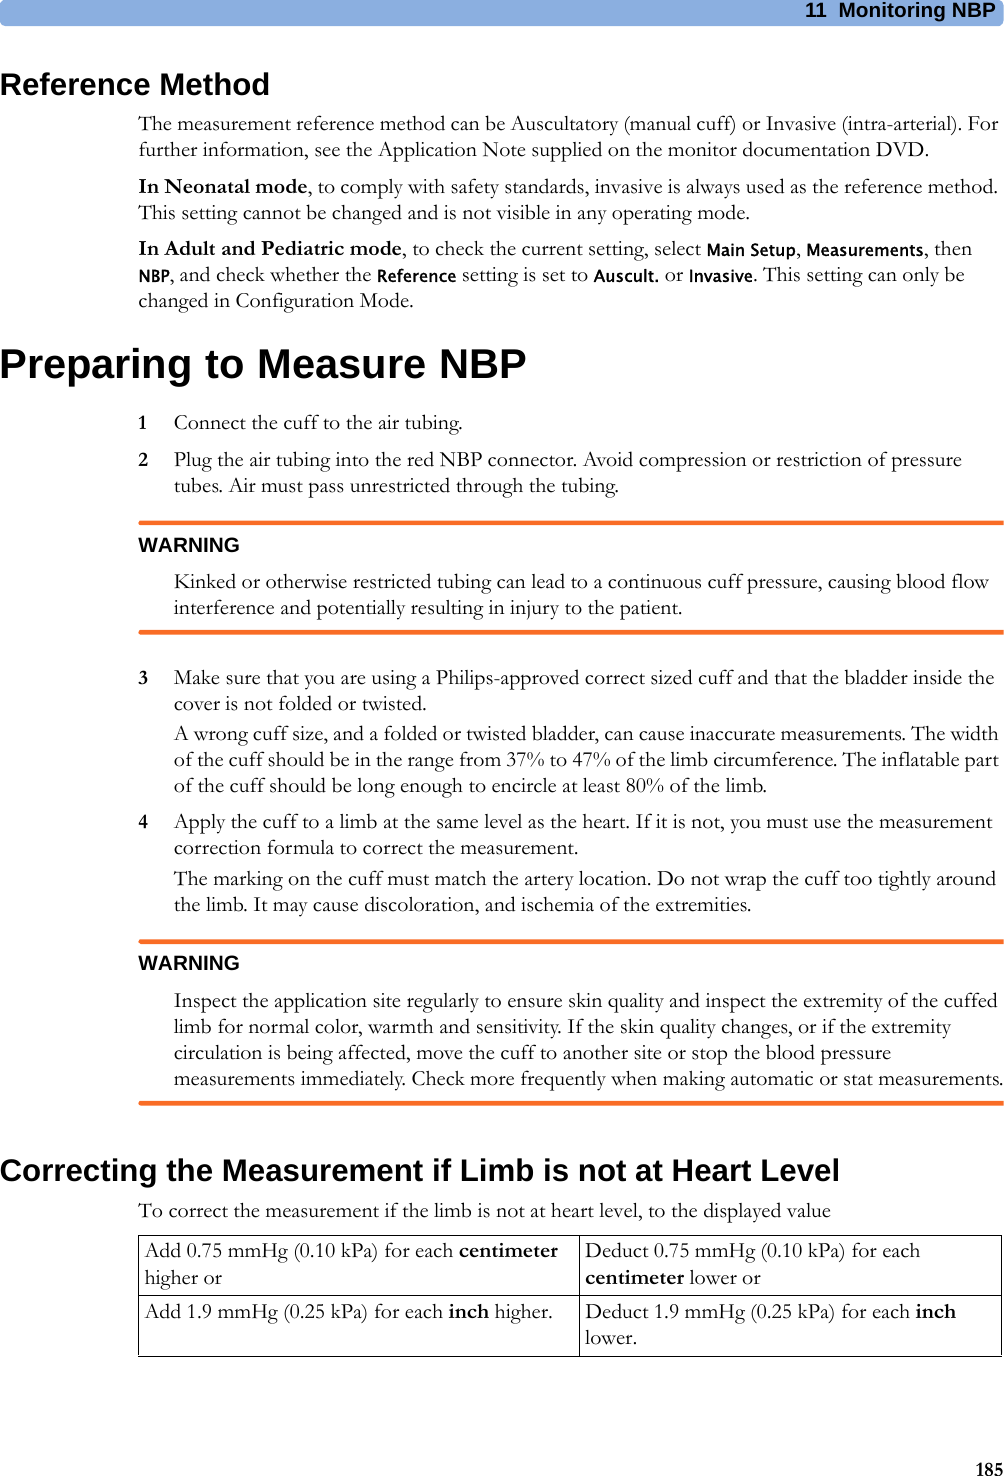 11 Monitoring NBP185Reference MethodThe measurement reference method can be Auscultatory (manual cuff) or Invasive (intra-arterial). For further information, see the Application Note supplied on the monitor documentation DVD.In Neonatal mode, to comply with safety standards, invasive is always used as the reference method. This setting cannot be changed and is not visible in any operating mode.In Adult and Pediatric mode, to check the current setting, select Main Setup, Measurements, then NBP, and check whether the Reference setting is set to Auscult. or Invasive. This setting can only be changed in Configuration Mode.Preparing to Measure NBP1Connect the cuff to the air tubing.2Plug the air tubing into the red NBP connector. Avoid compression or restriction of pressure tubes. Air must pass unrestricted through the tubing.WARNINGKinked or otherwise restricted tubing can lead to a continuous cuff pressure, causing blood flow interference and potentially resulting in injury to the patient.3Make sure that you are using a Philips-approved correct sized cuff and that the bladder inside the cover is not folded or twisted.A wrong cuff size, and a folded or twisted bladder, can cause inaccurate measurements. The width of the cuff should be in the range from 37% to 47% of the limb circumference. The inflatable part of the cuff should be long enough to encircle at least 80% of the limb.4Apply the cuff to a limb at the same level as the heart. If it is not, you must use the measurement correction formula to correct the measurement.The marking on the cuff must match the artery location. Do not wrap the cuff too tightly around the limb. It may cause discoloration, and ischemia of the extremities.WARNINGInspect the application site regularly to ensure skin quality and inspect the extremity of the cuffed limb for normal color, warmth and sensitivity. If the skin quality changes, or if the extremity circulation is being affected, move the cuff to another site or stop the blood pressure measurements immediately. Check more frequently when making automatic or stat measurements.Correcting the Measurement if Limb is not at Heart LevelTo correct the measurement if the limb is not at heart level, to the displayed valueAdd 0.75 mmHg (0.10 kPa) for each centimeter higher orDeduct 0.75 mmHg (0.10 kPa) for each centimeter lower orAdd 1.9 mmHg (0.25 kPa) for each inch higher. Deduct 1.9 mmHg (0.25 kPa) for each inch lower.